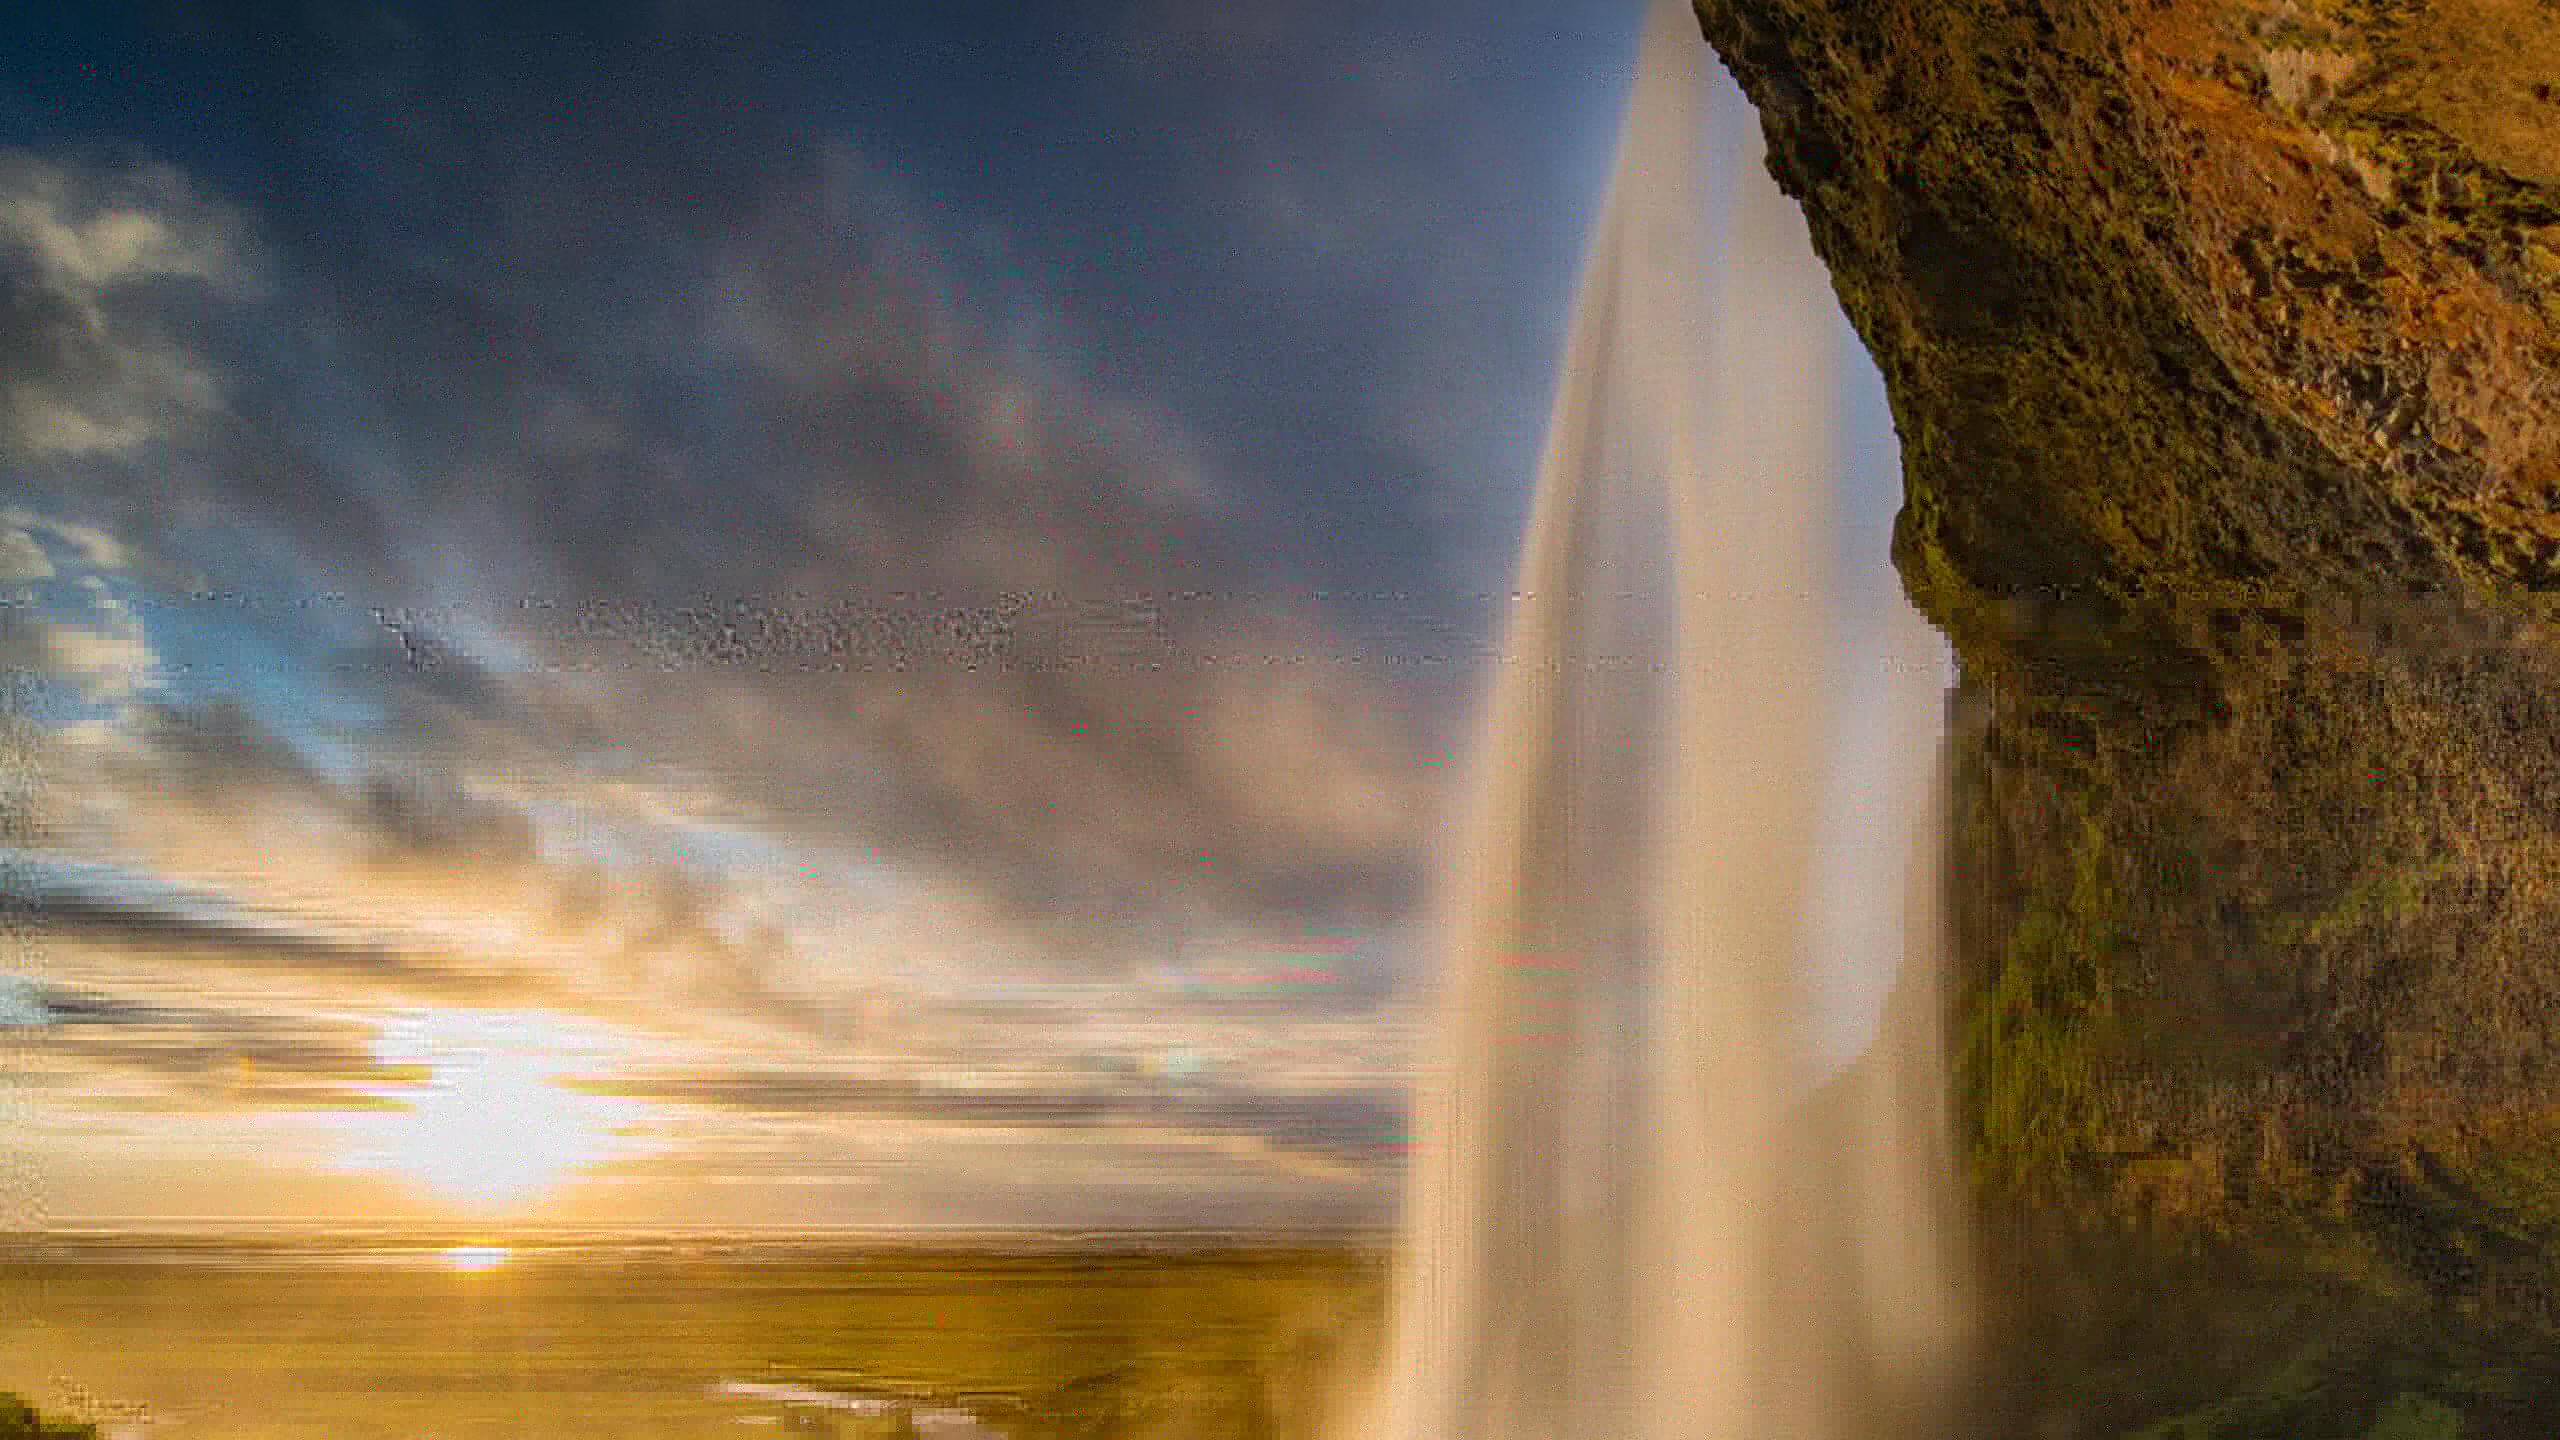 Seljalandsfoss 4K wallpaper for your desktop or mobile screen free and easy to download